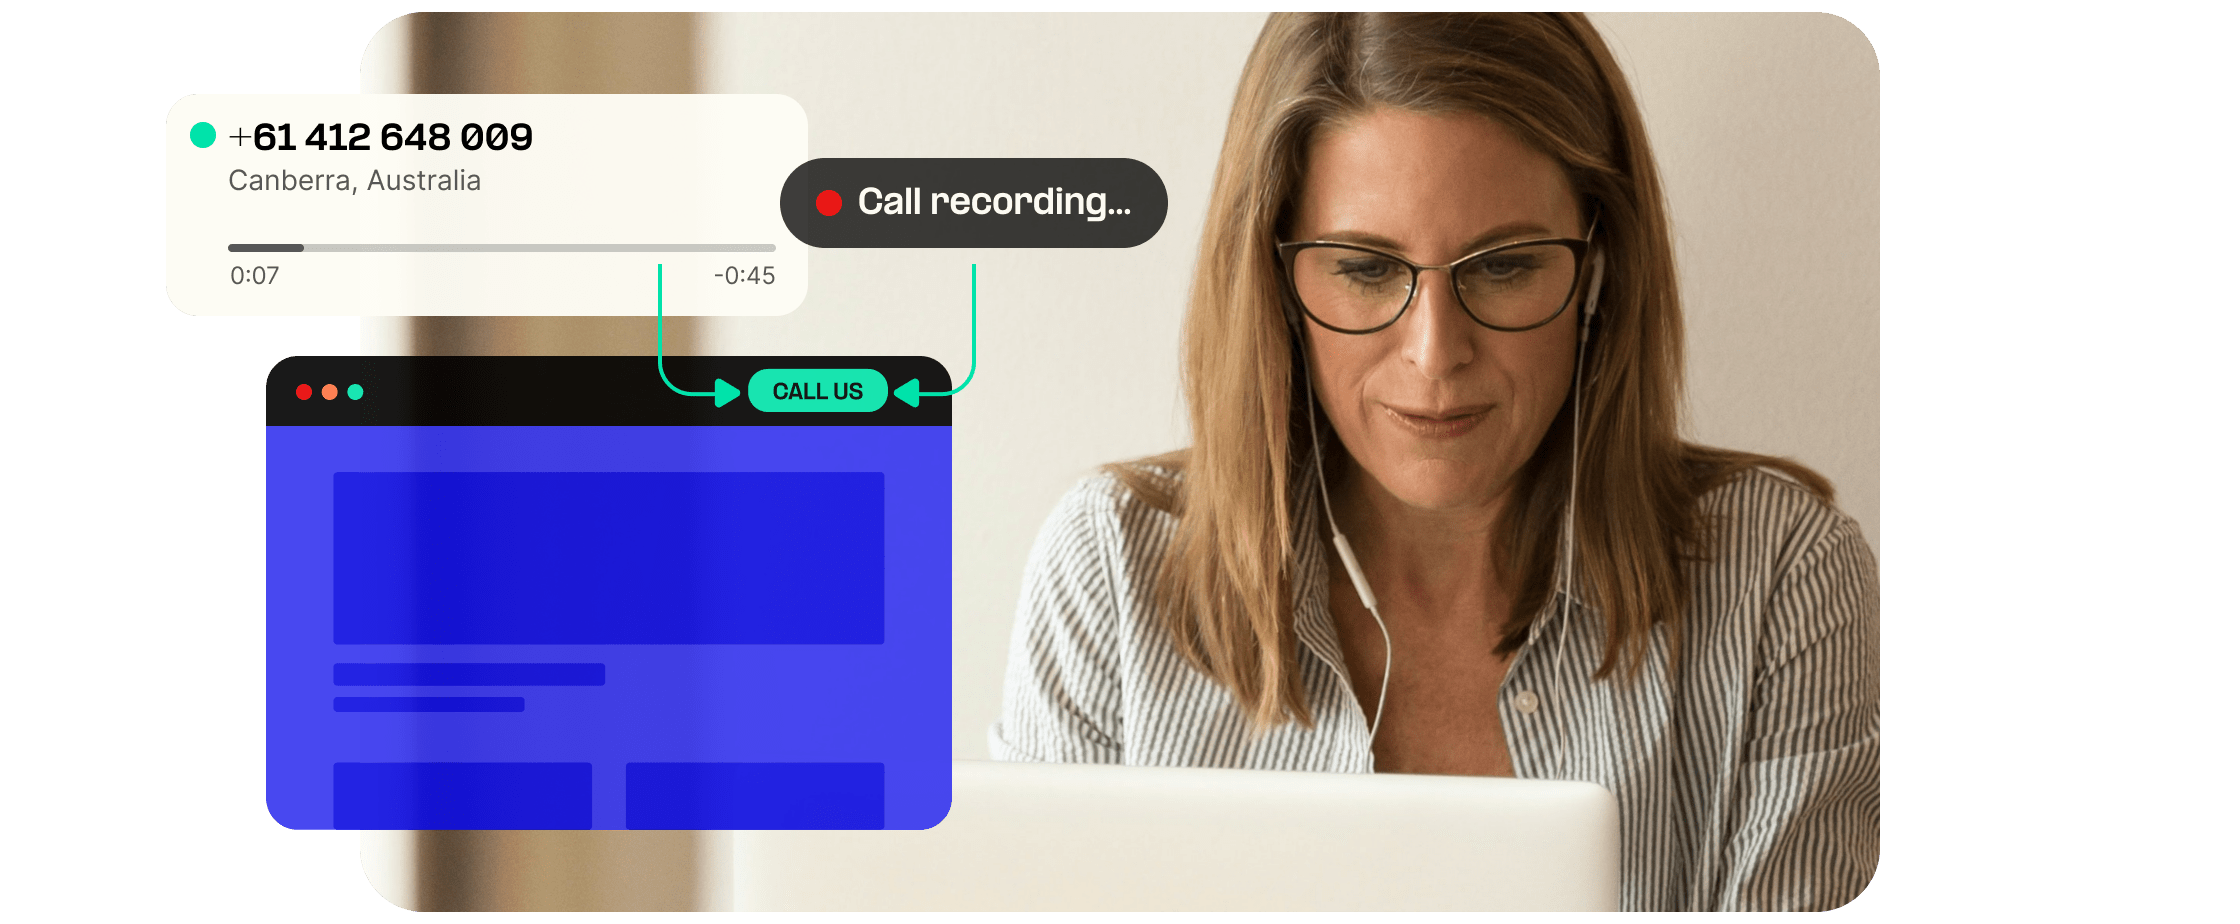 Woman connects VoIP call with custom built dialer